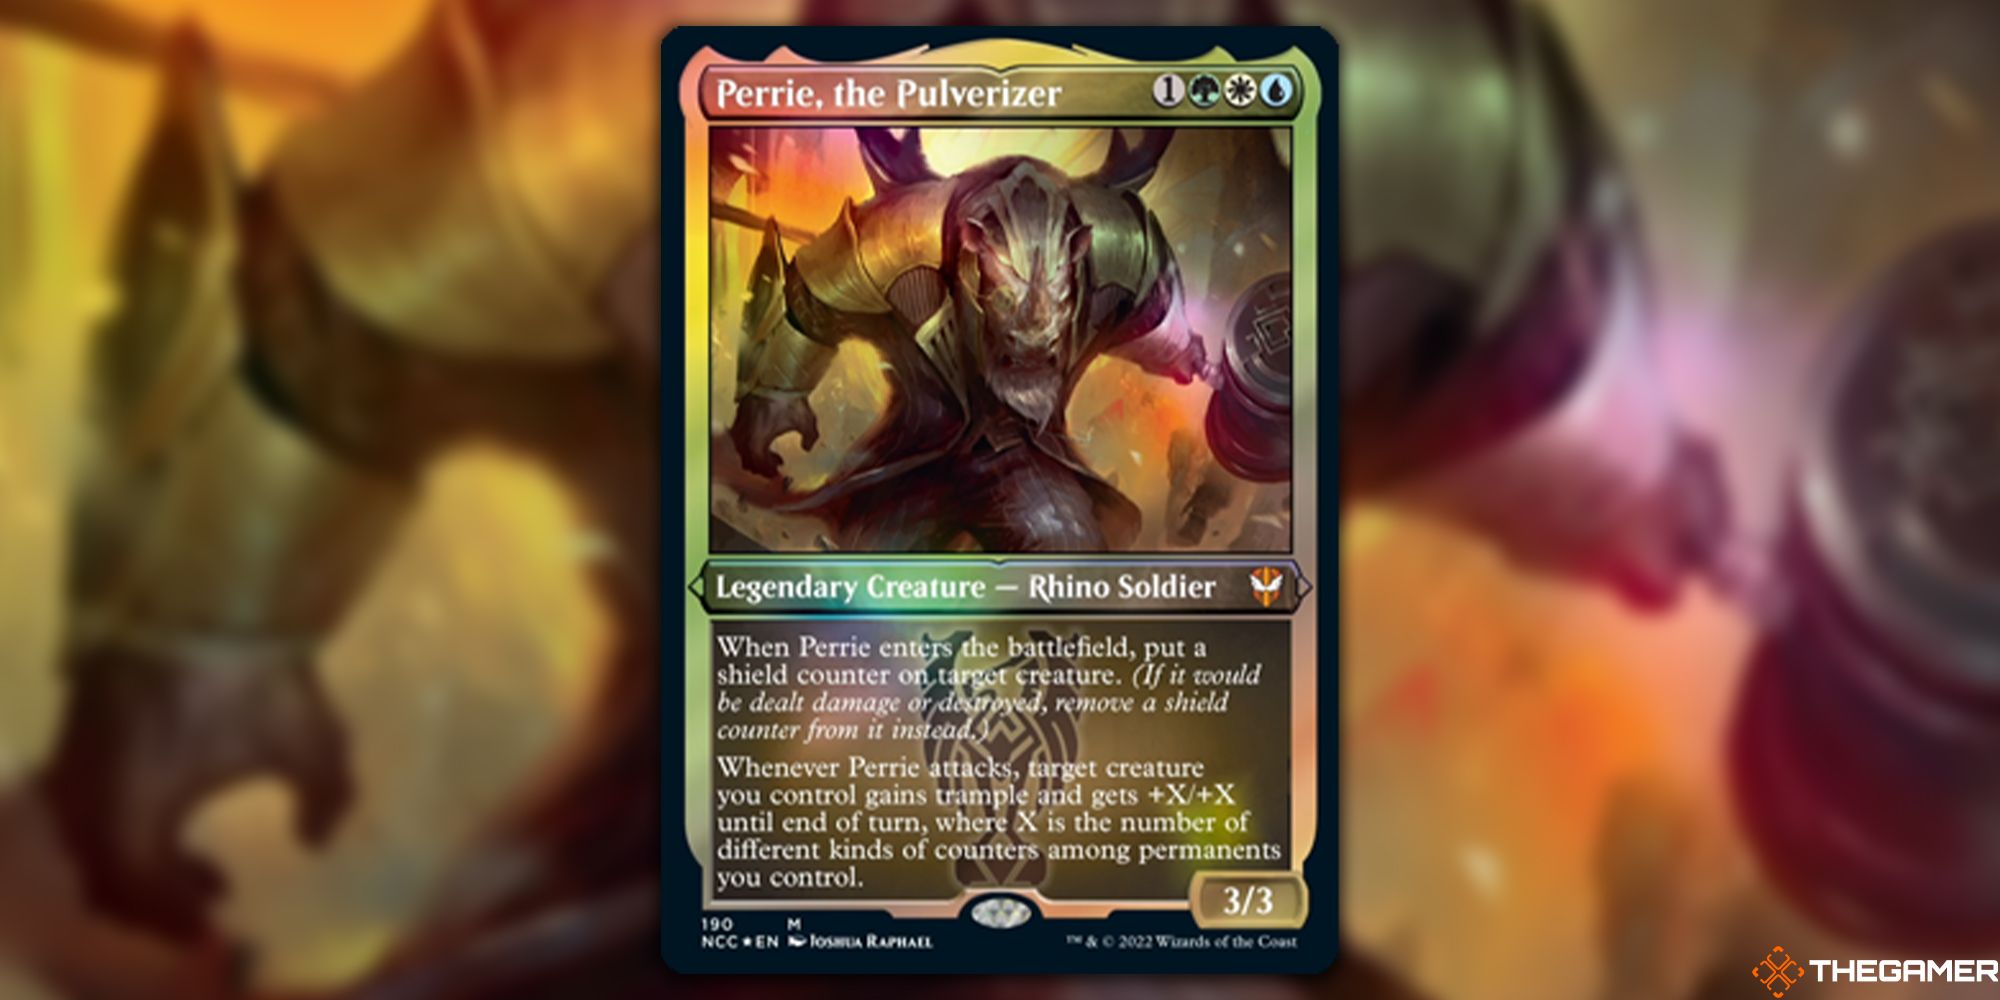 Image of the Perrie, the Pulverizer card in Magic: The Gathering, with art by Joshua Raphael